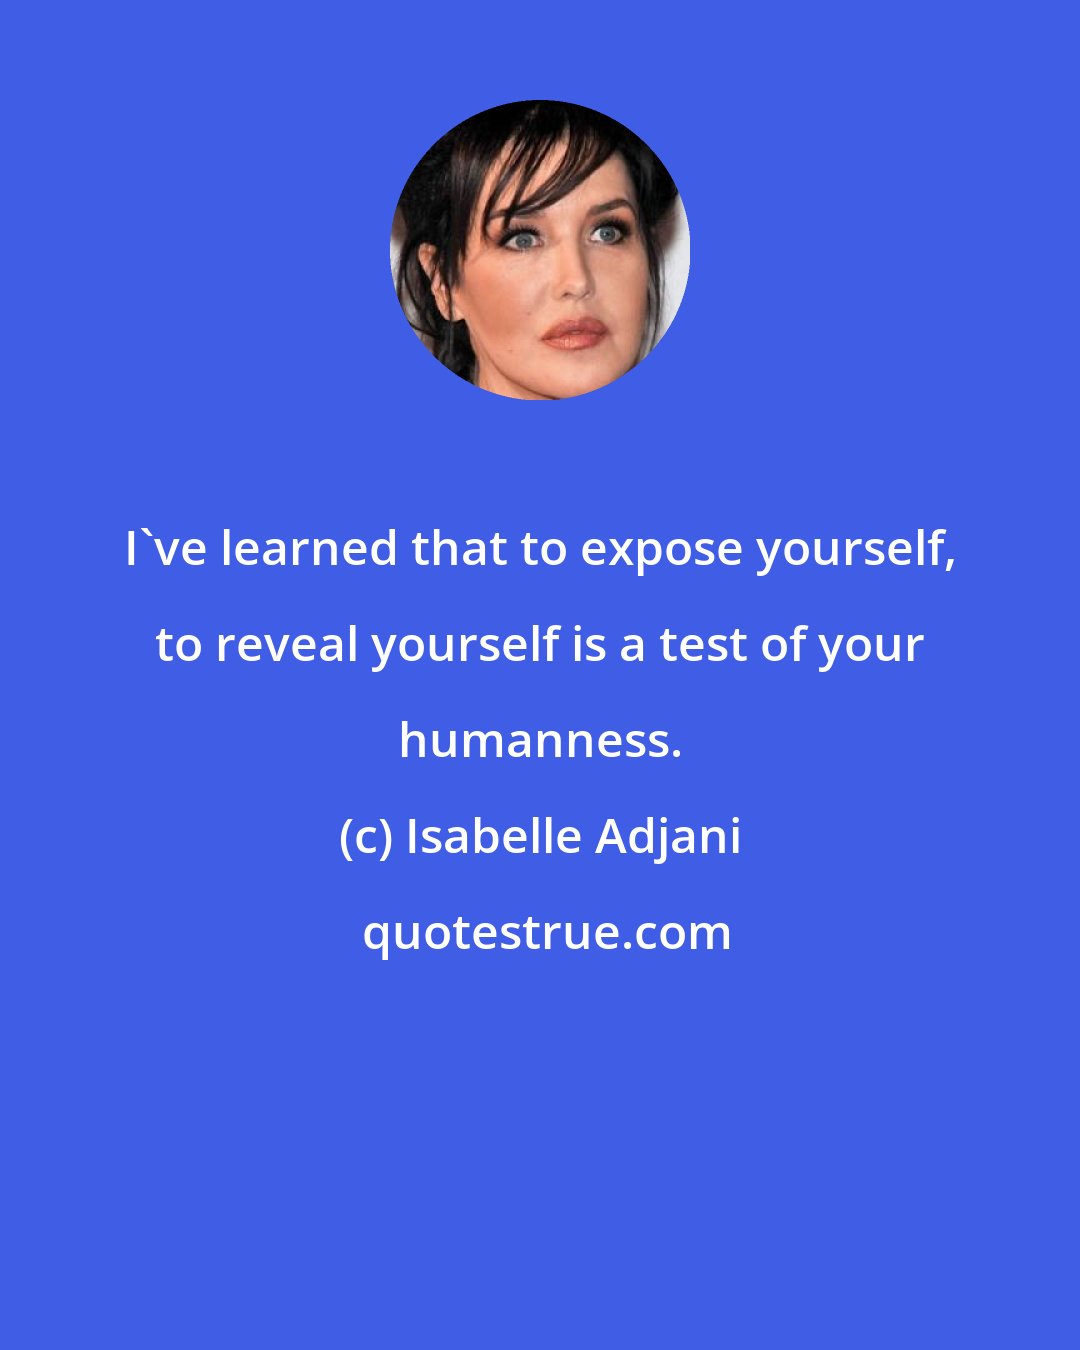 Isabelle Adjani: I've learned that to expose yourself, to reveal yourself is a test of your humanness.